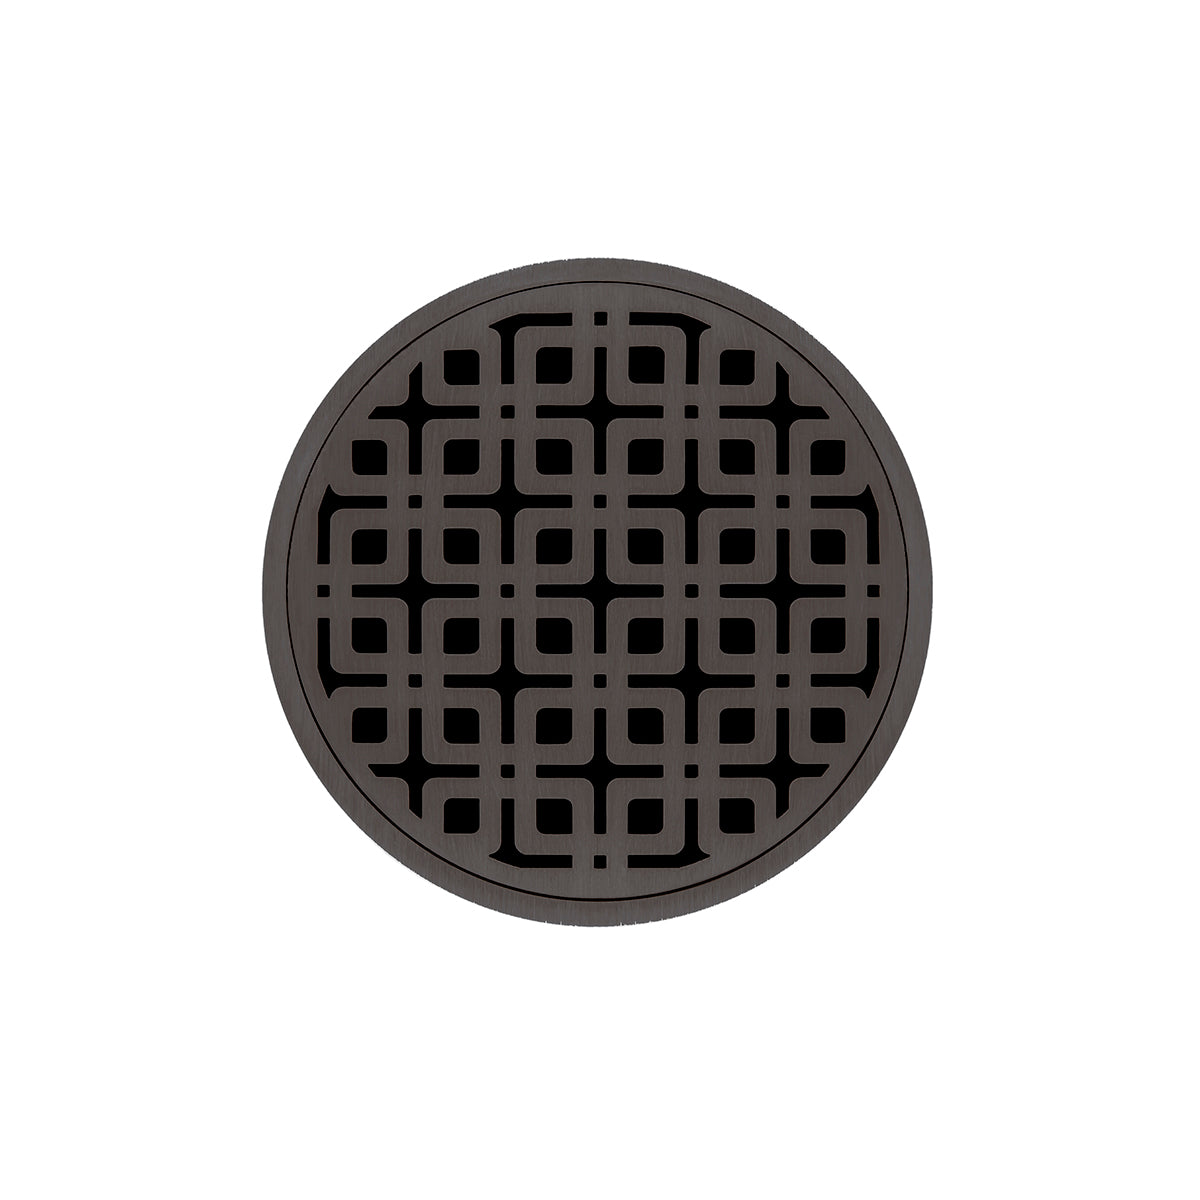 Infinity Drain 5" Round RKD 5 Premium Center Drain Kit with Link Pattern Decorative Plate with ABS Drain Body, 2" Outlet